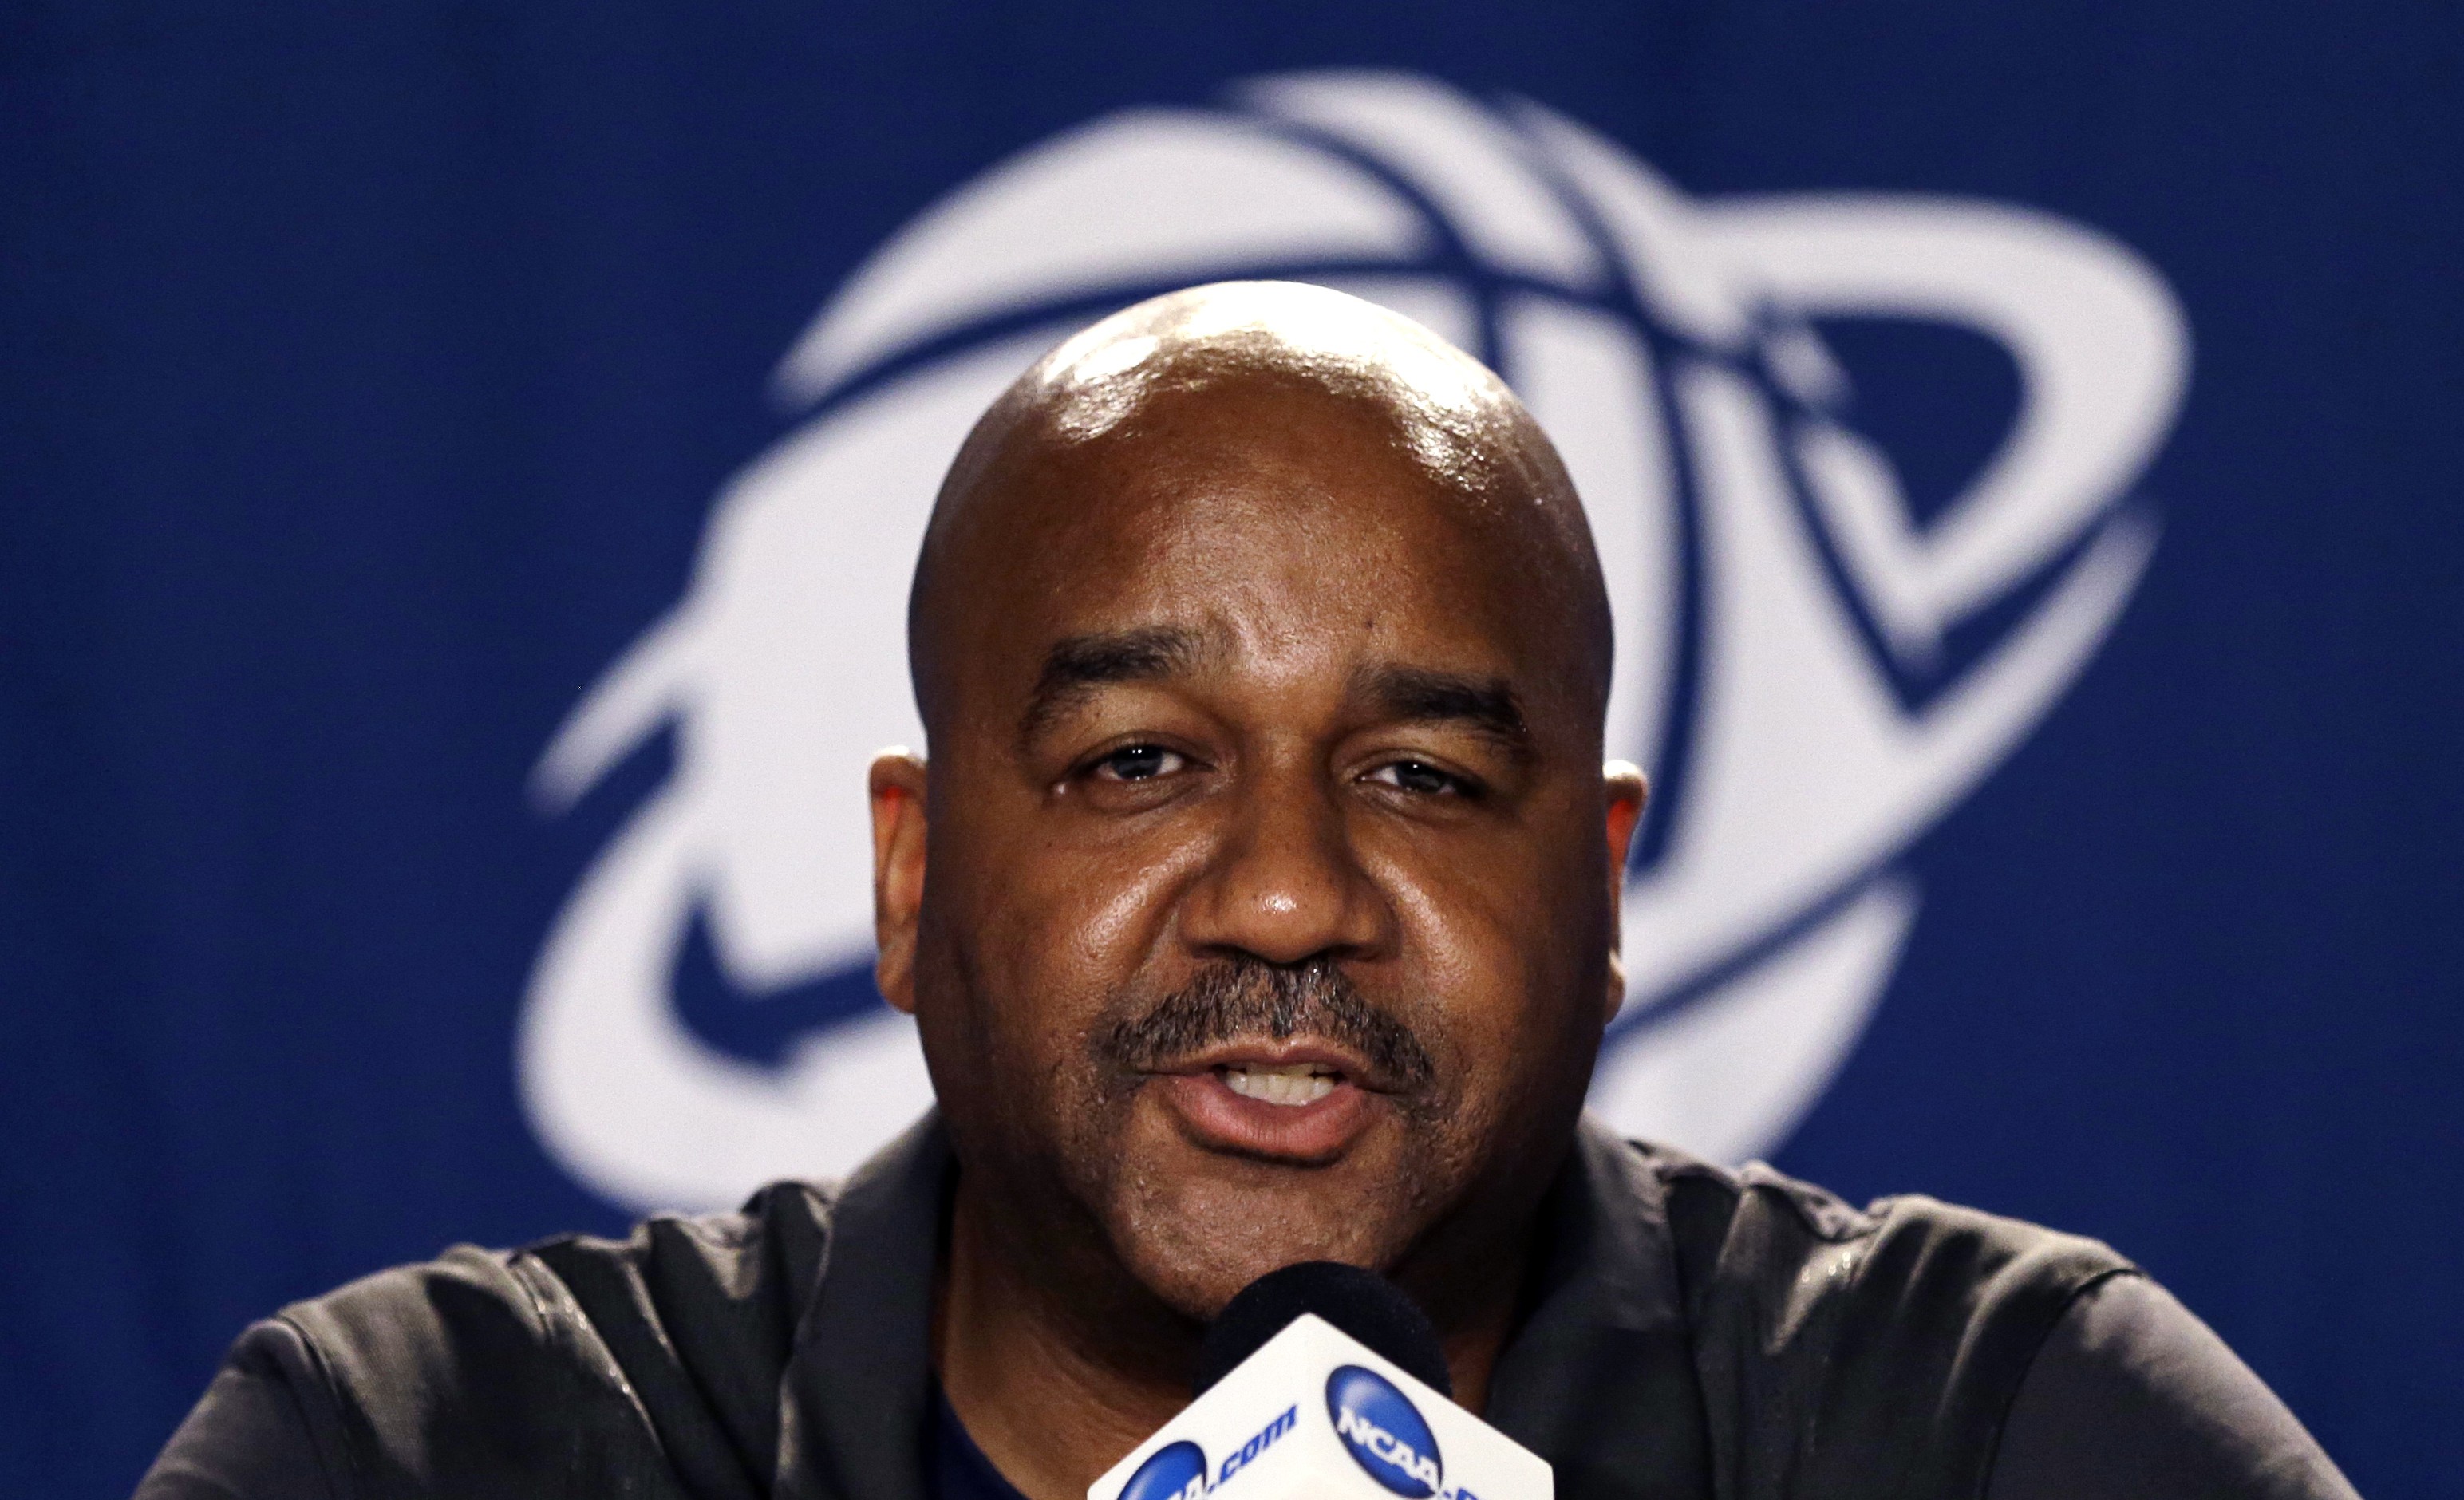 Georgetown coach John Thompson III speaks before practice for an NCAA college basketball second round game in Portland, Ore., Wednesday, March 18, 2015. Georgetown plays Eastern Washington on Thursday. (AP Photo/Don Ryan)